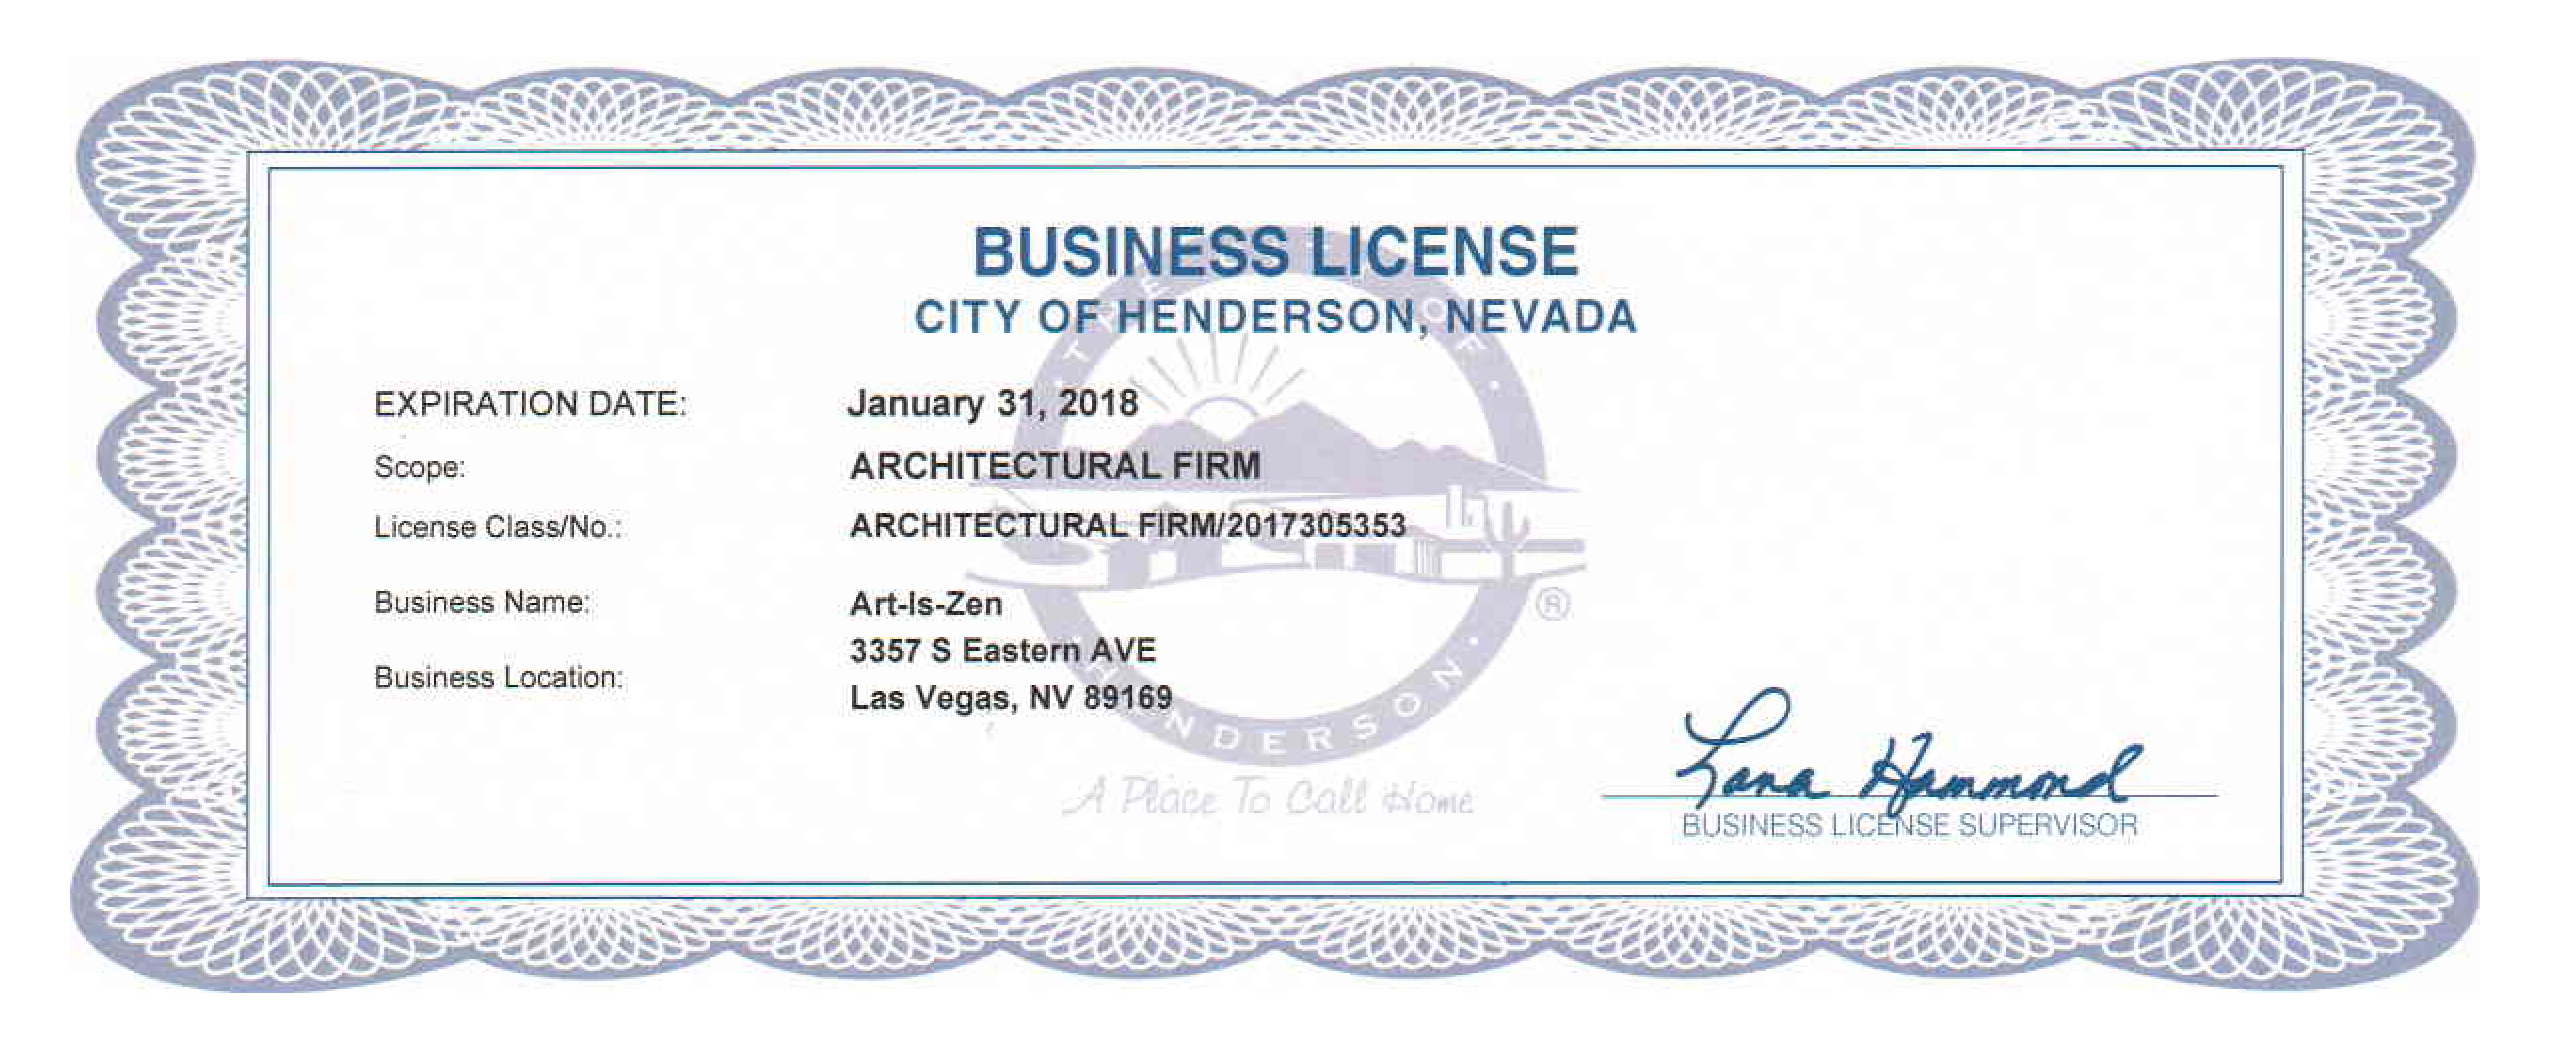 clark county nevada business license search